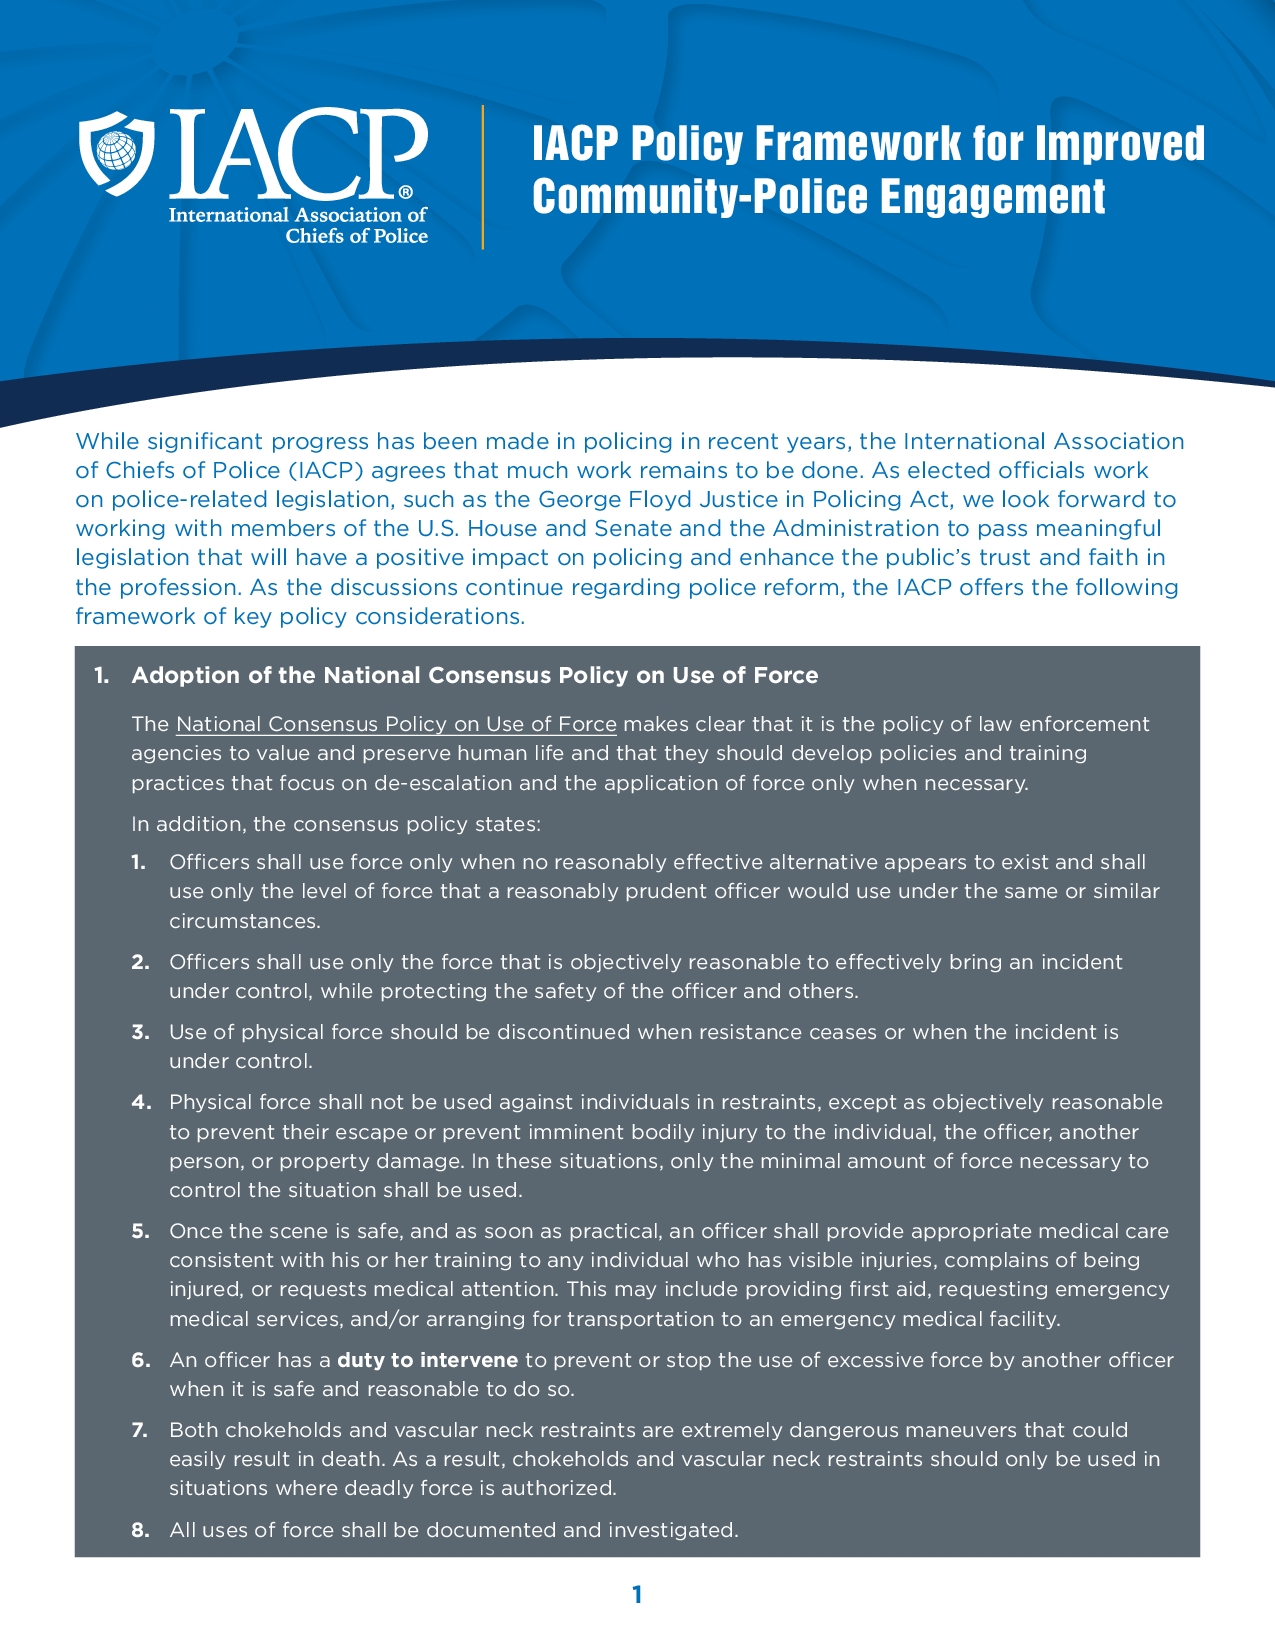 IACP Policy Framework for Improved CommunityPolice Engagement pdf